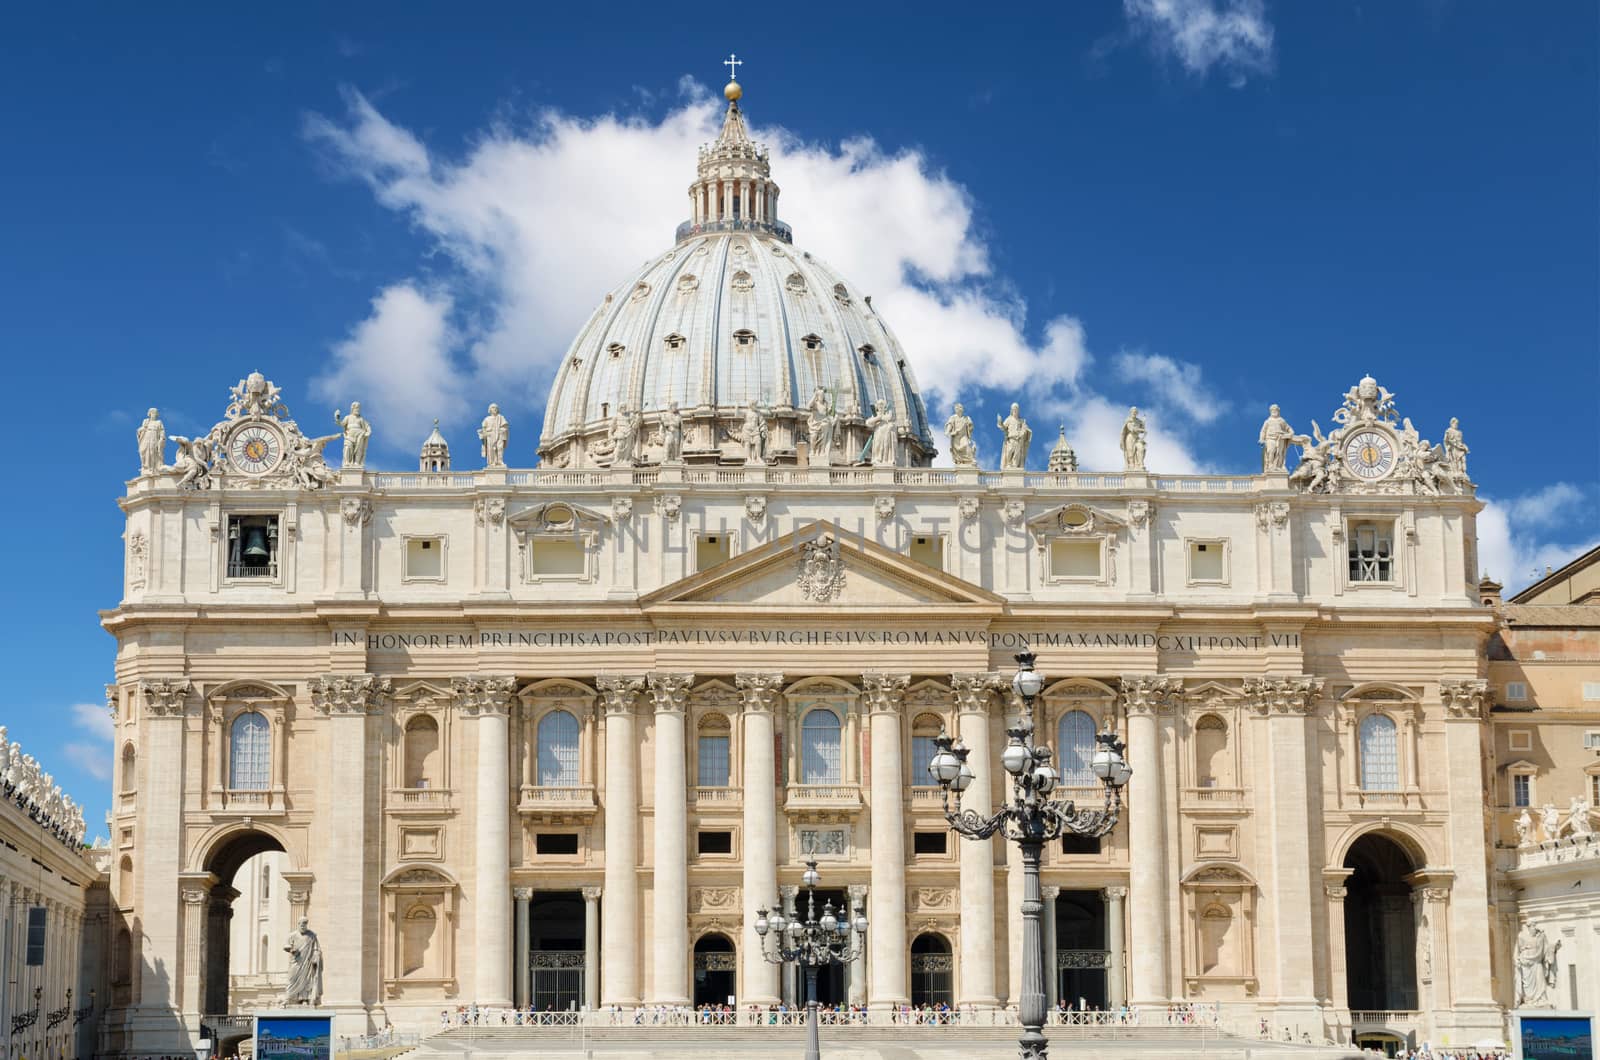 The Vatican in Rome, Italy. by HERRAEZ